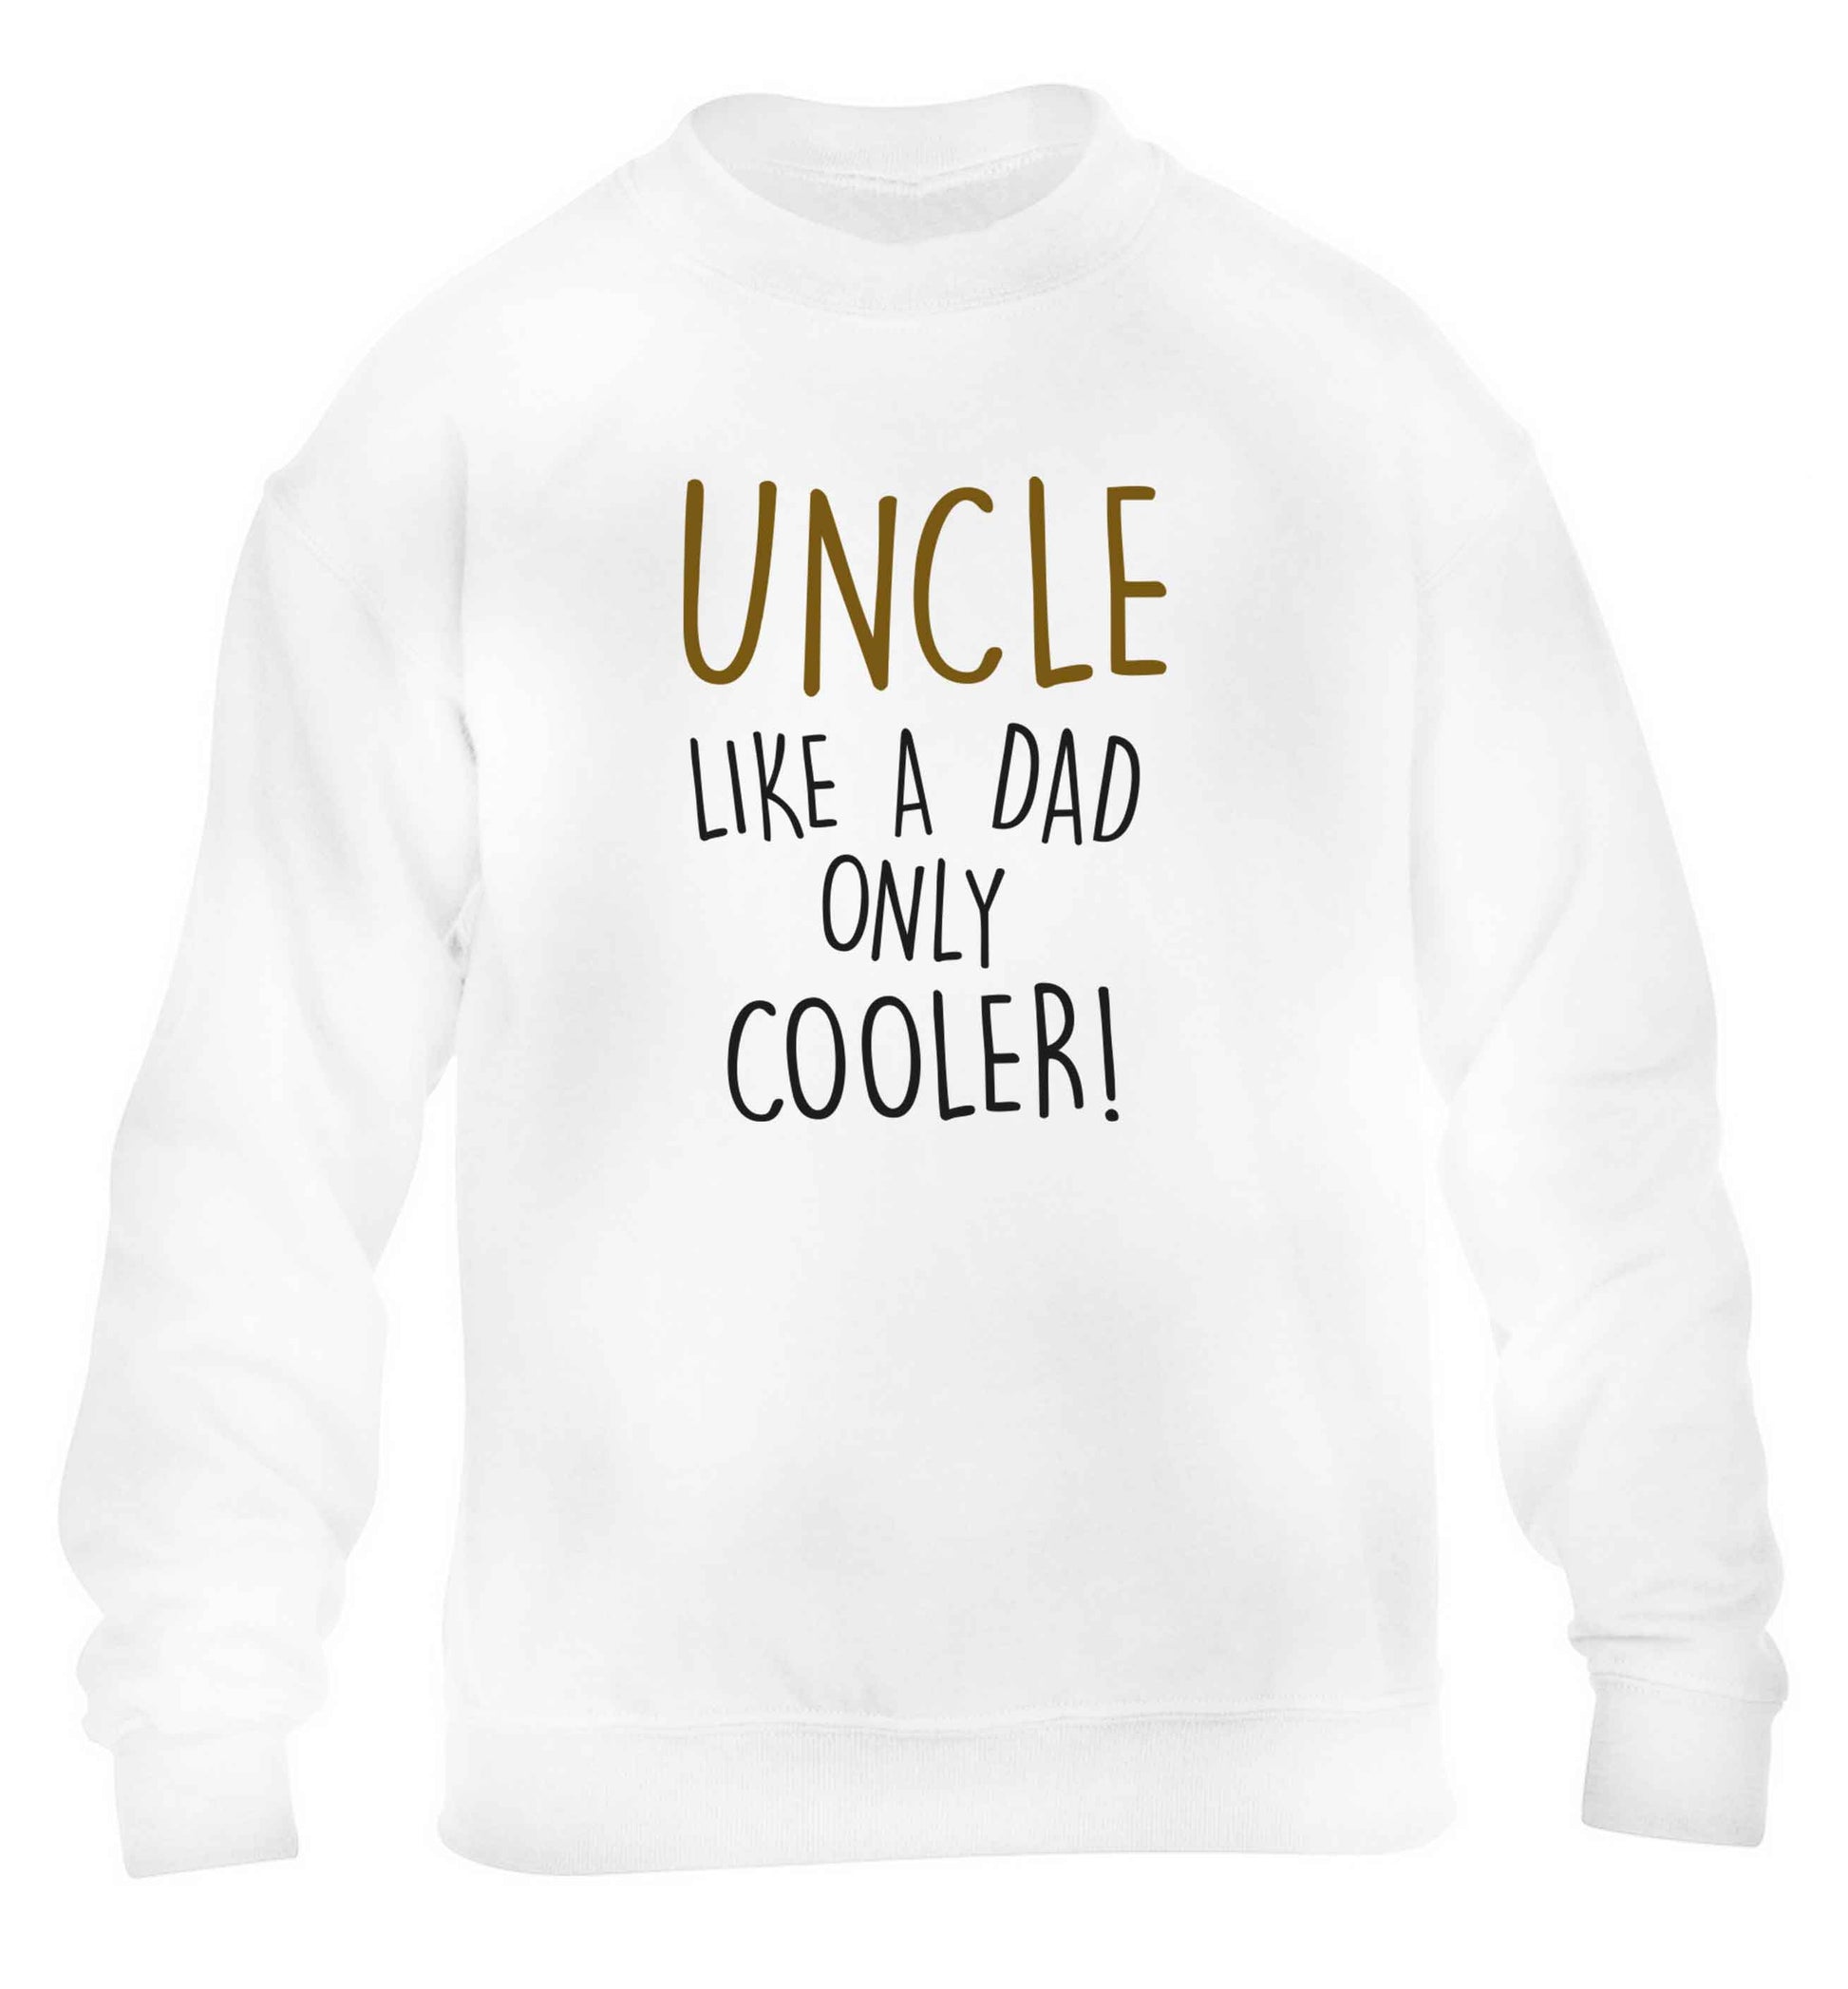 Uncle like a dad only cooler children's white sweater 12-13 Years